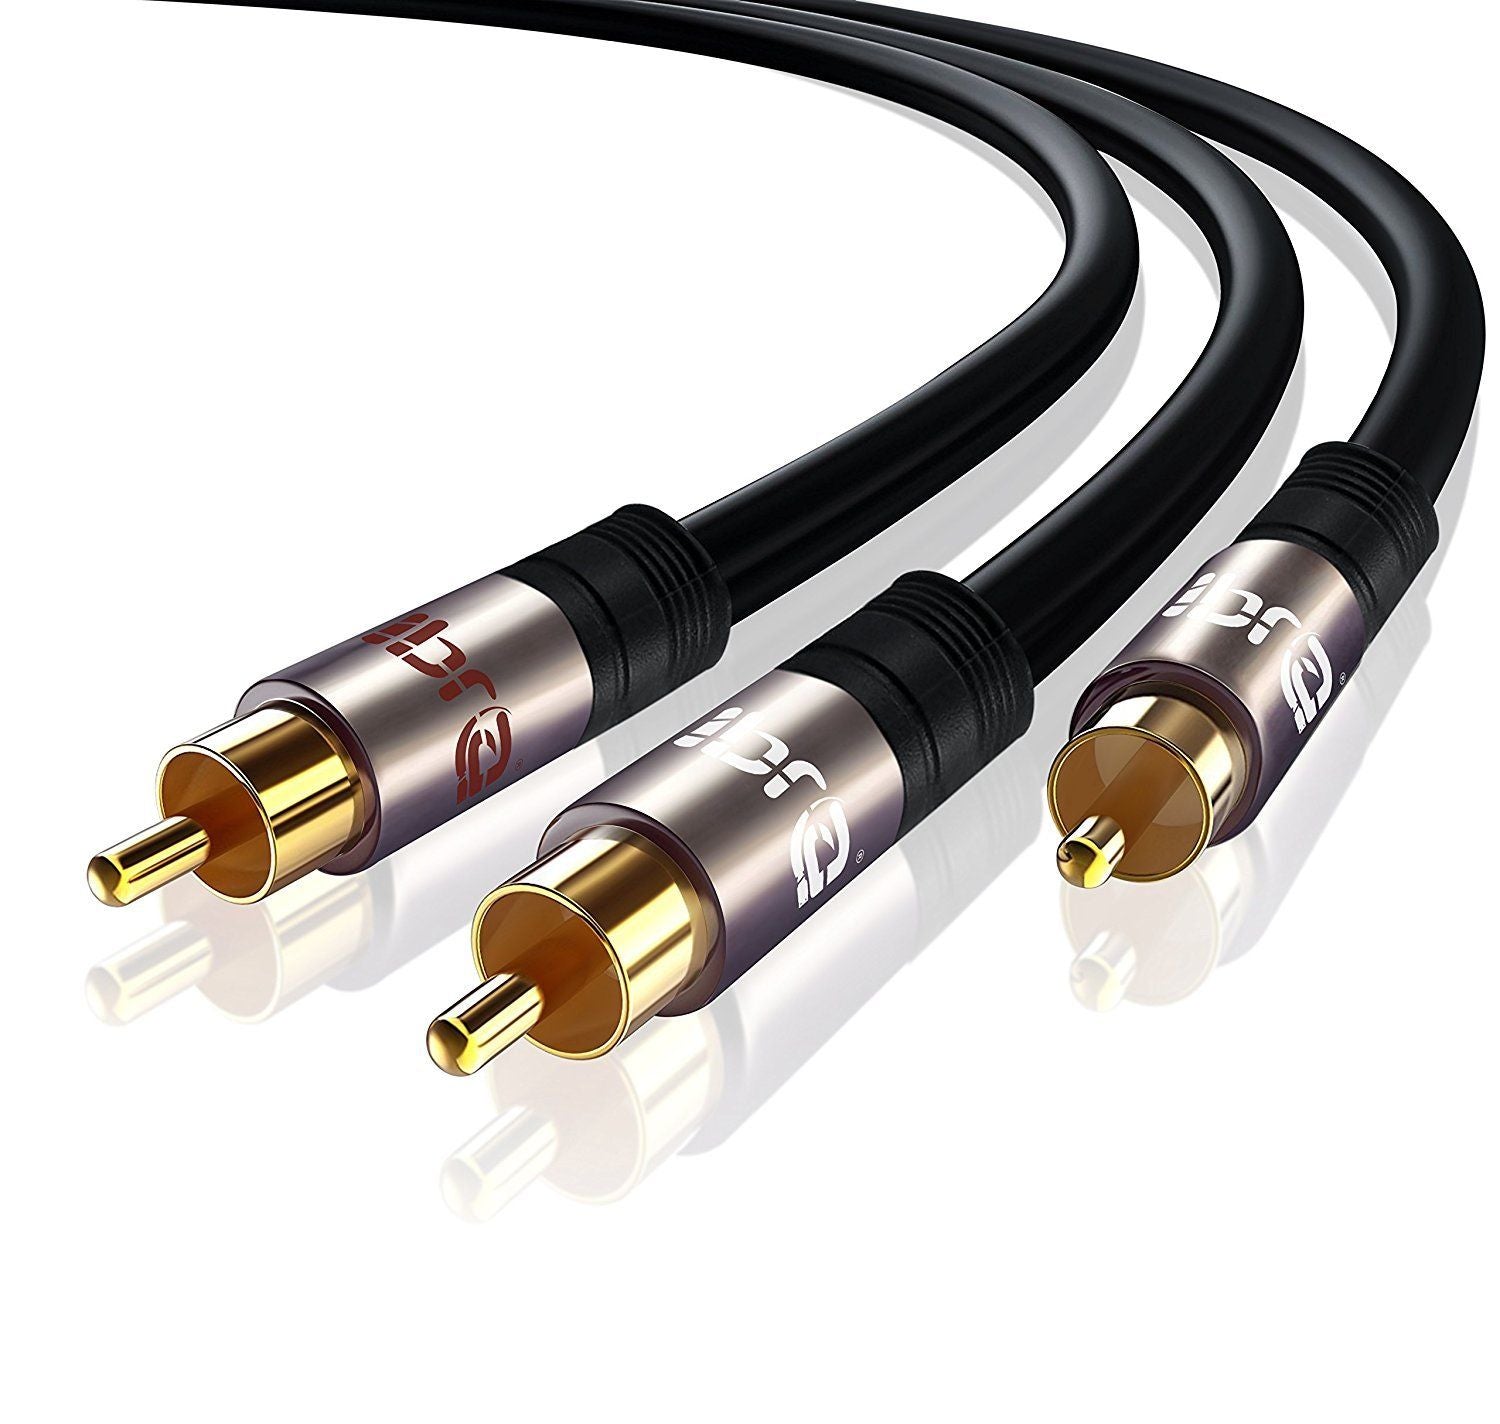 IBRA 2M Y Cable / Subwoofer Cable / Audio Cable / RCA Cable (1 x RCA to 2 x RCA) - GUN Metal Range